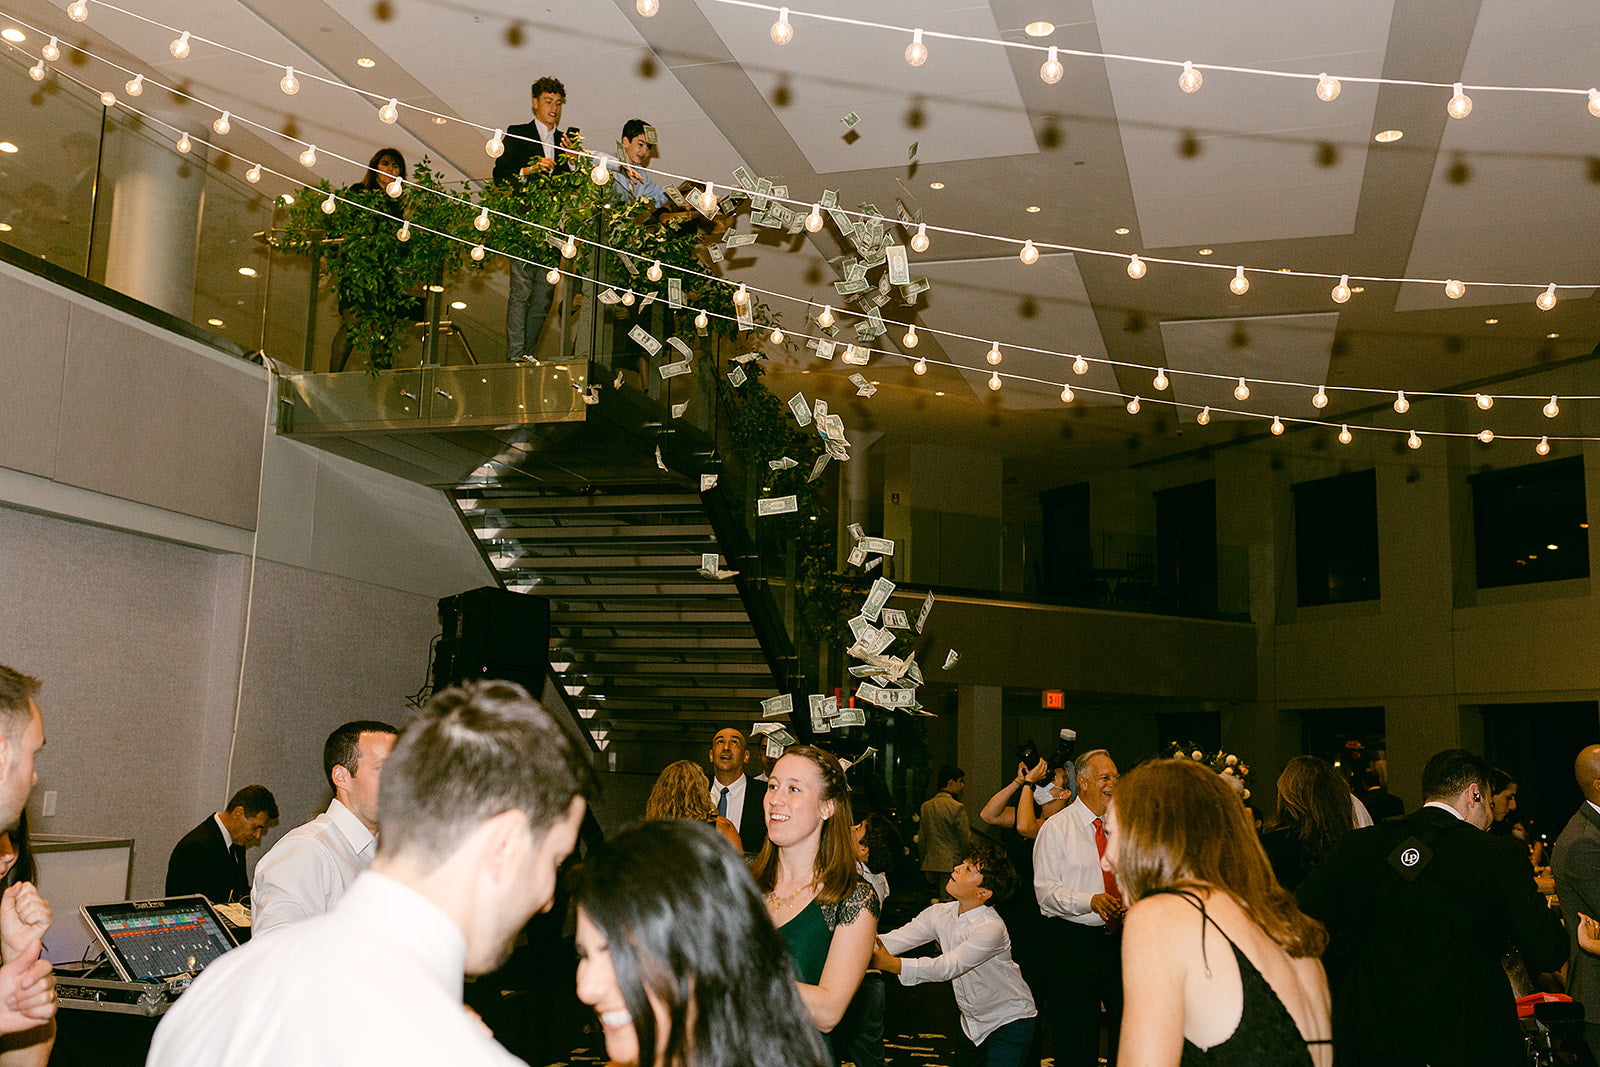 traditional greek sirtaki dance at the state room with money in the air